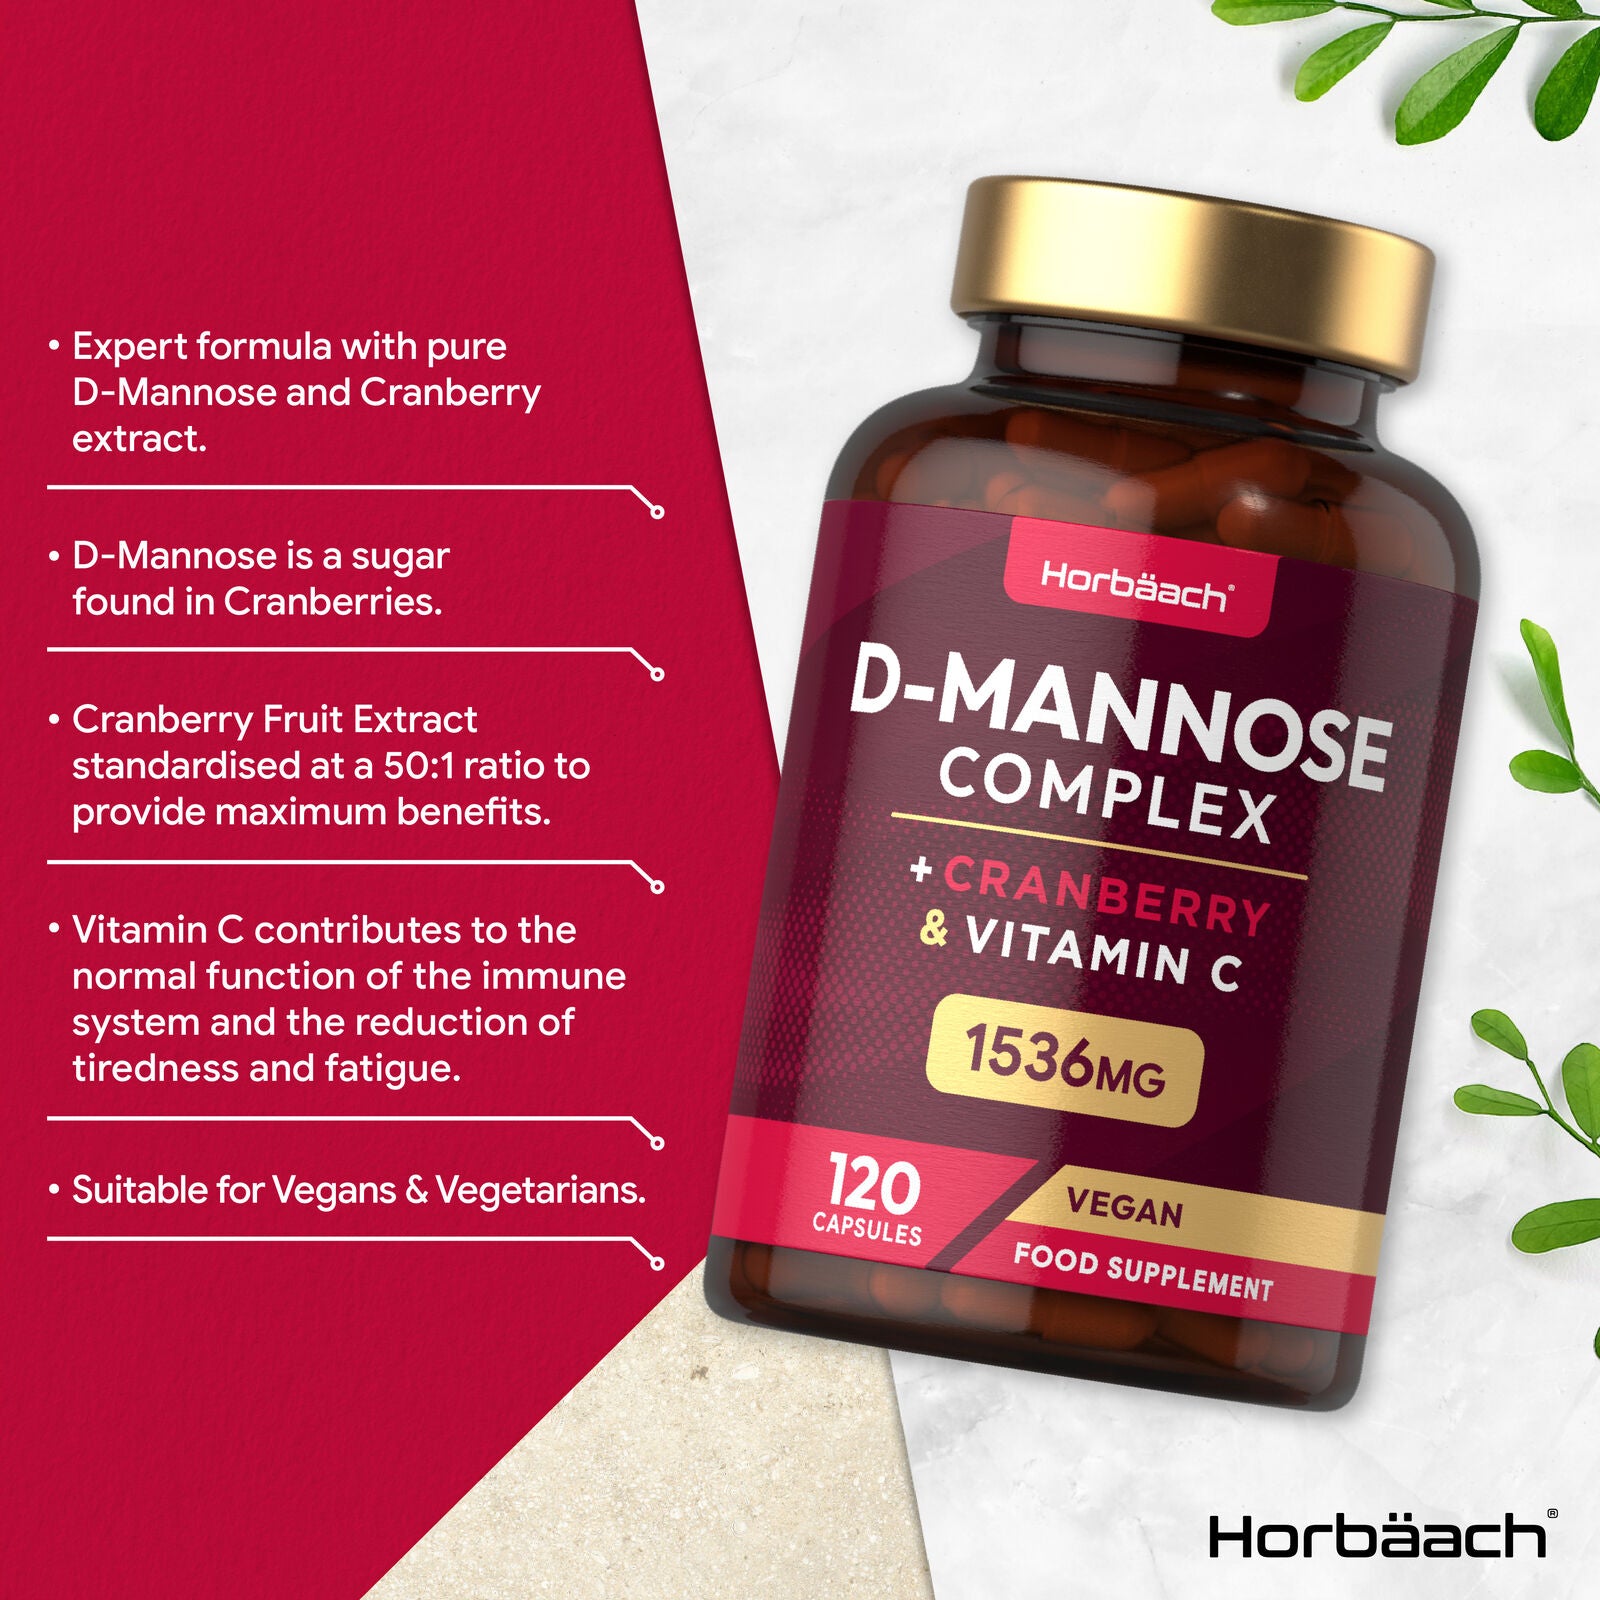 D-Mannose and Cranberry Complex 1536 mg | 120 Capsules